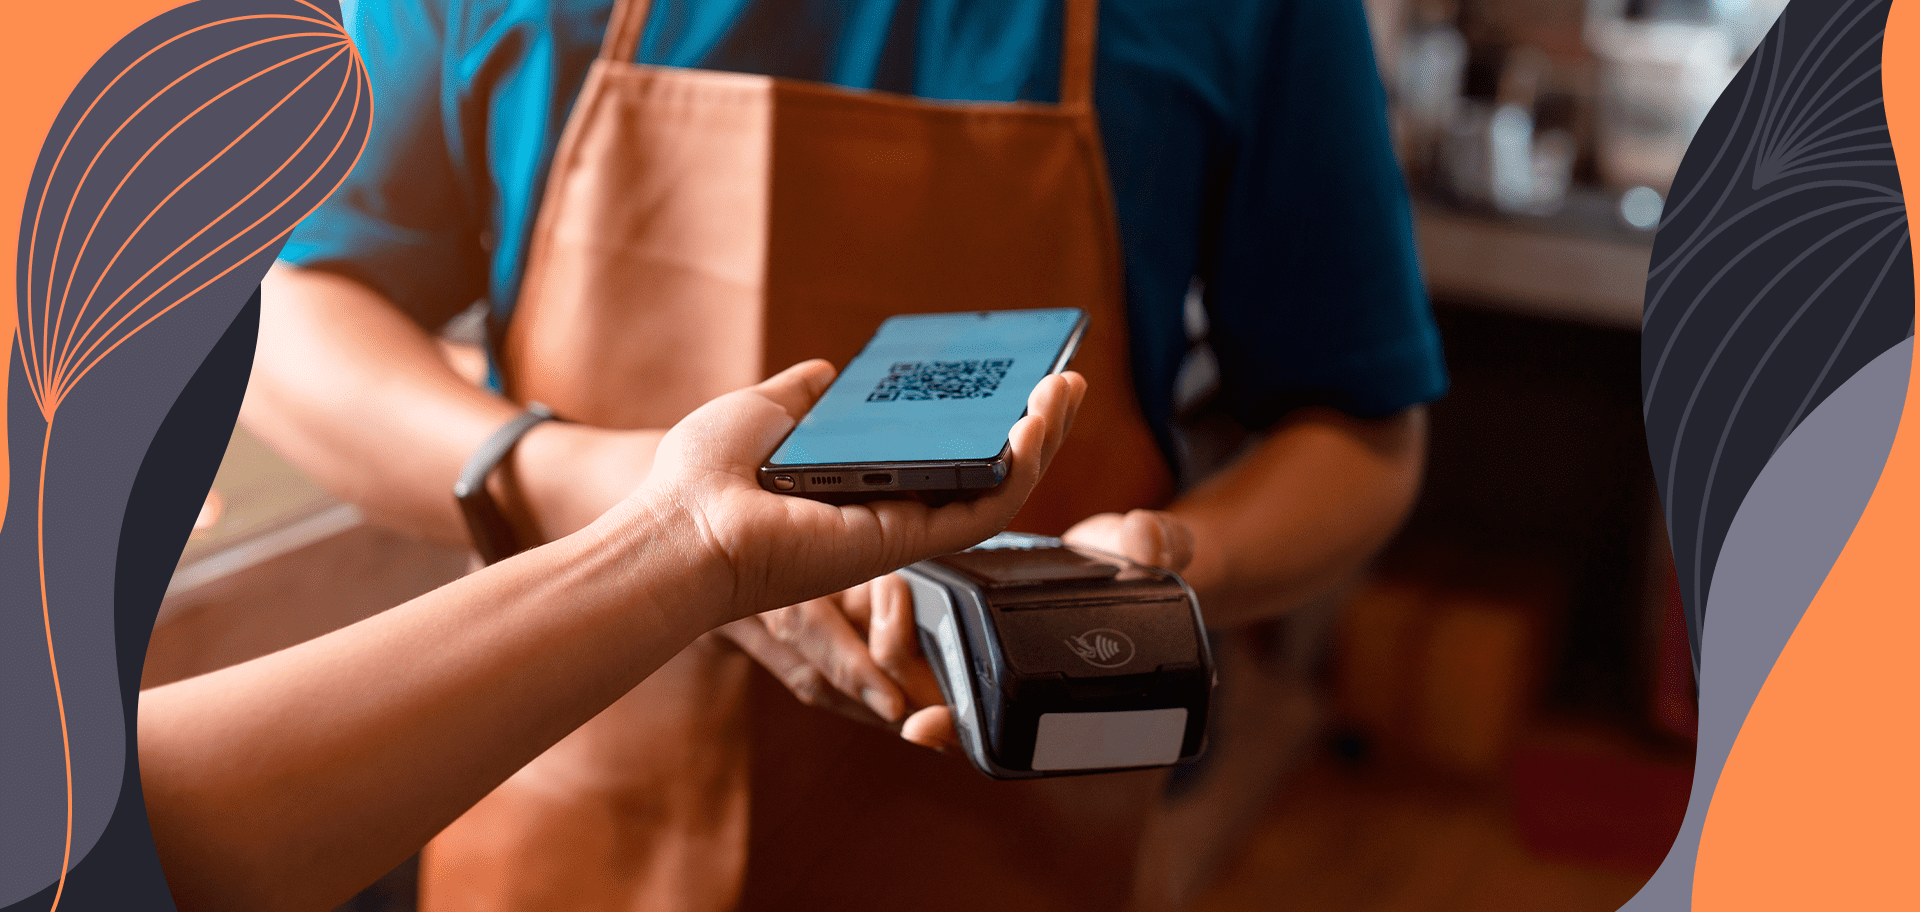 The evolution of digital and mobile wallets